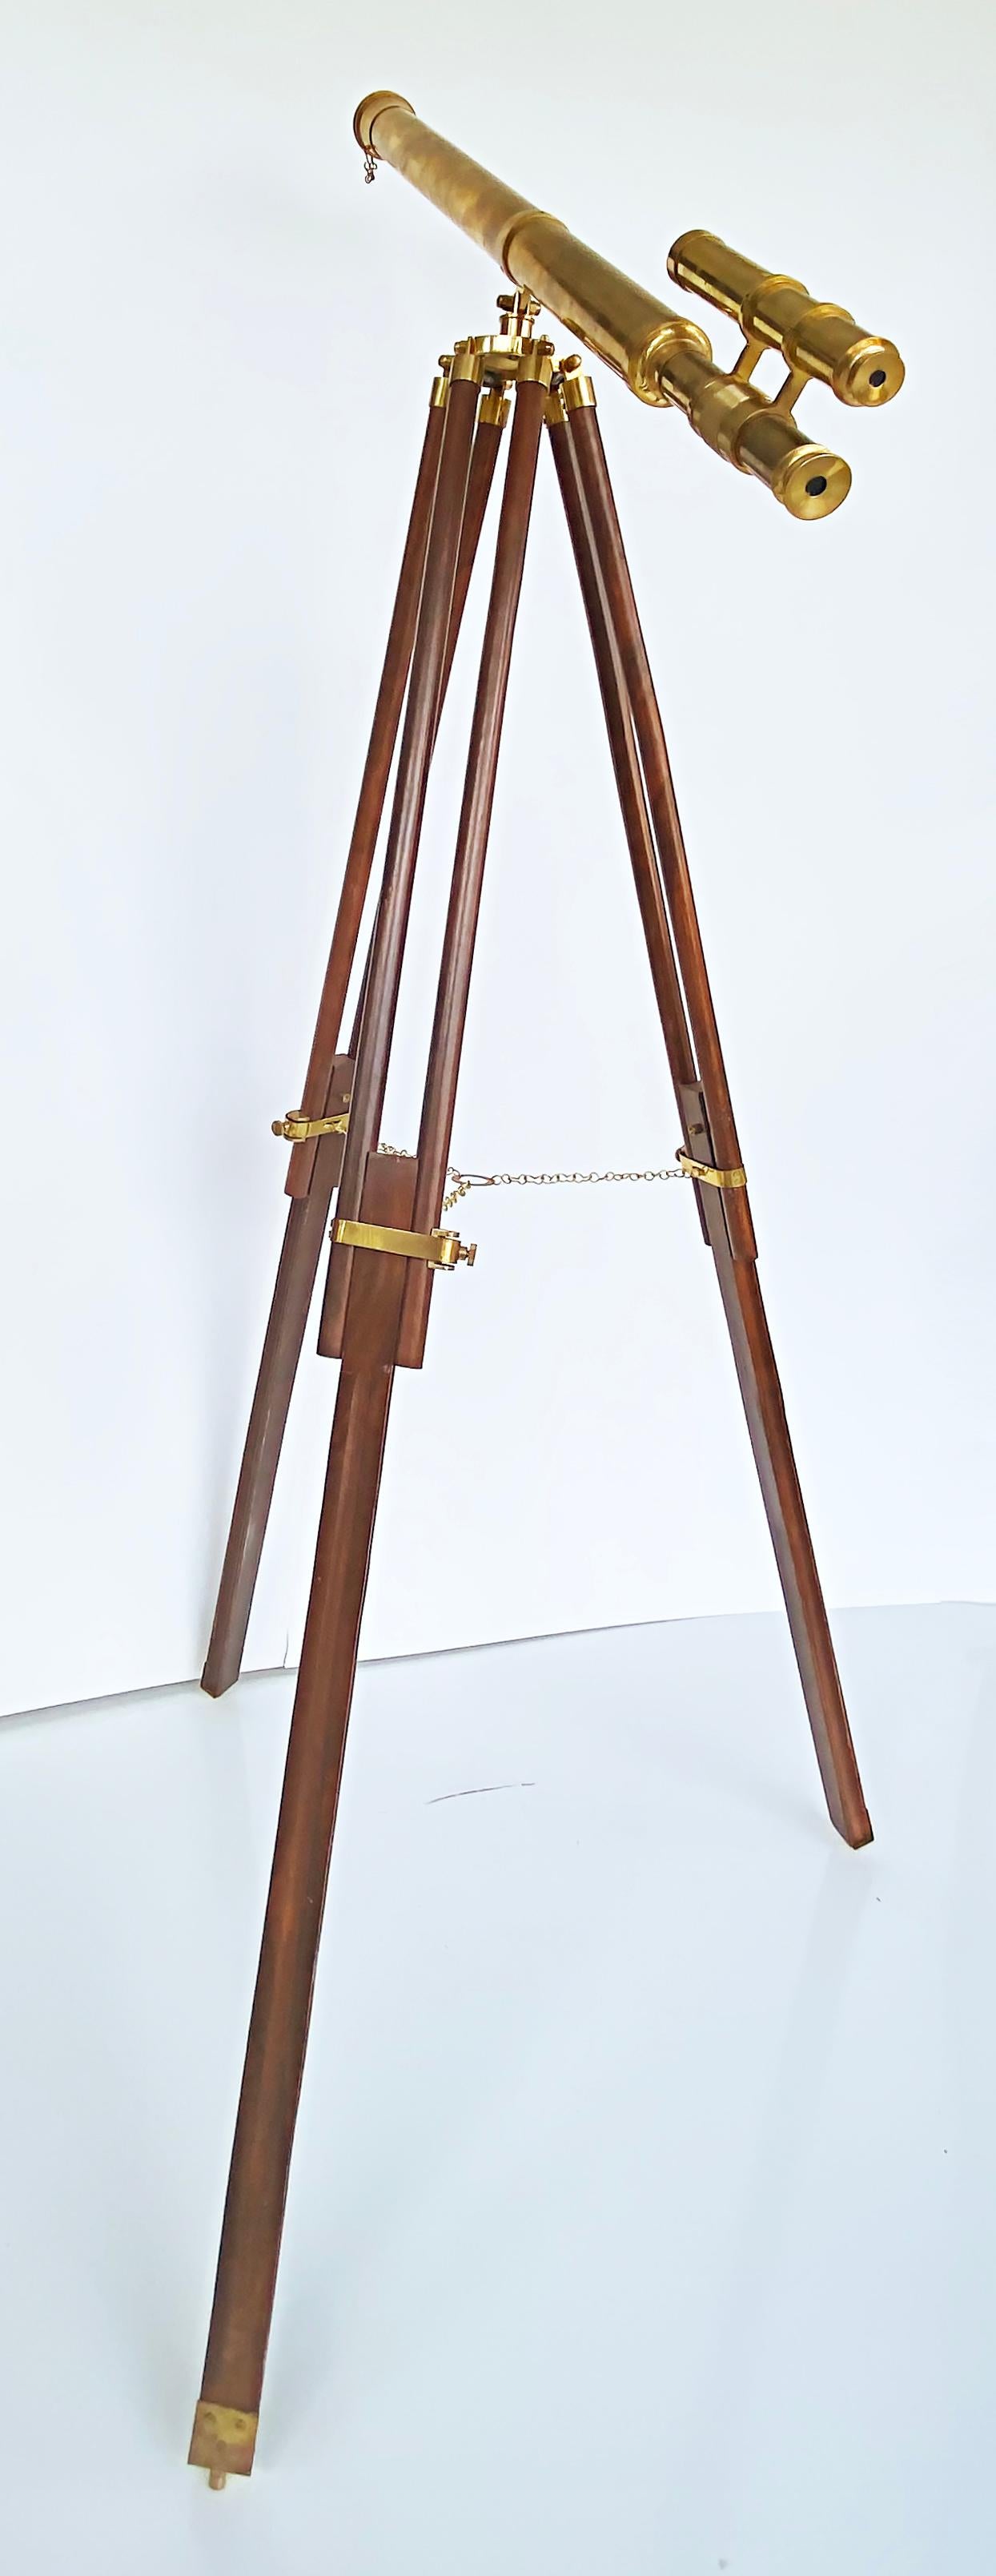 Brass Double Telescope Mounted on Adjustable Tripod Wooden, Brass Mounted Stand

Offered for sale is a finely machined brass double telescope mounted on an adjustable mahogany base with a brass-mounted stand. This is a great object for display in